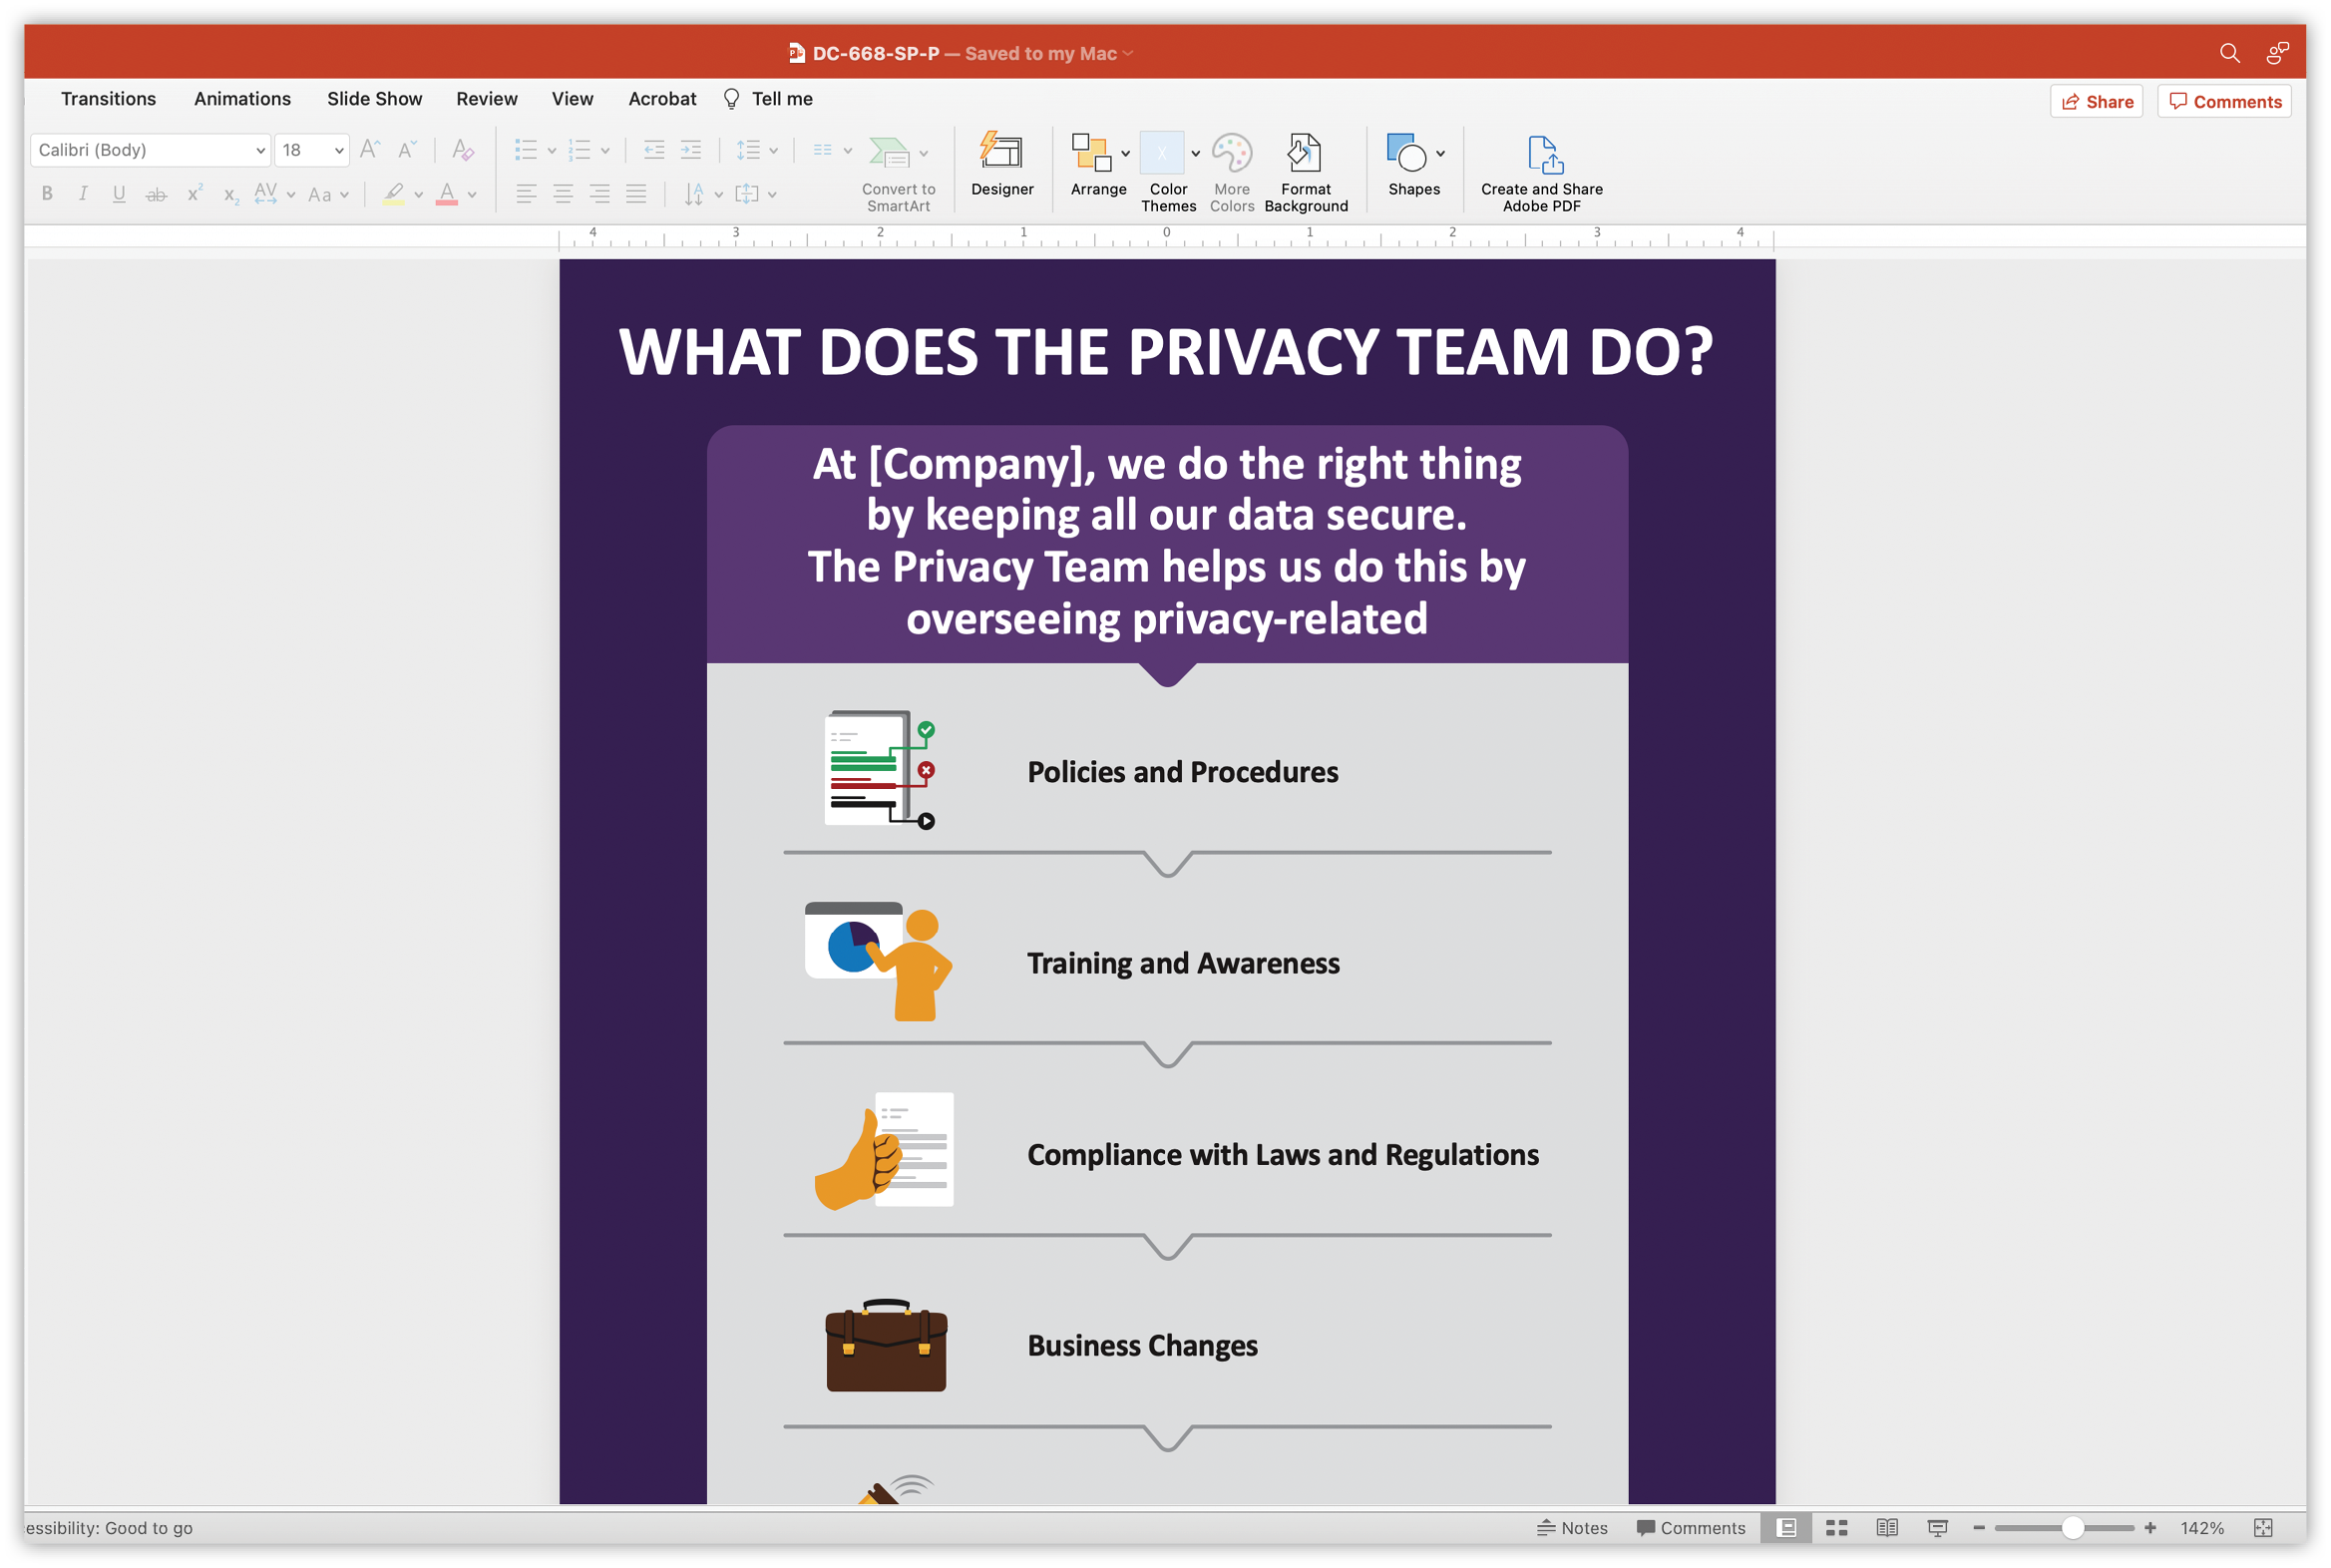 A PowerPoint window is open with a job aid about the Privacy Team inside.